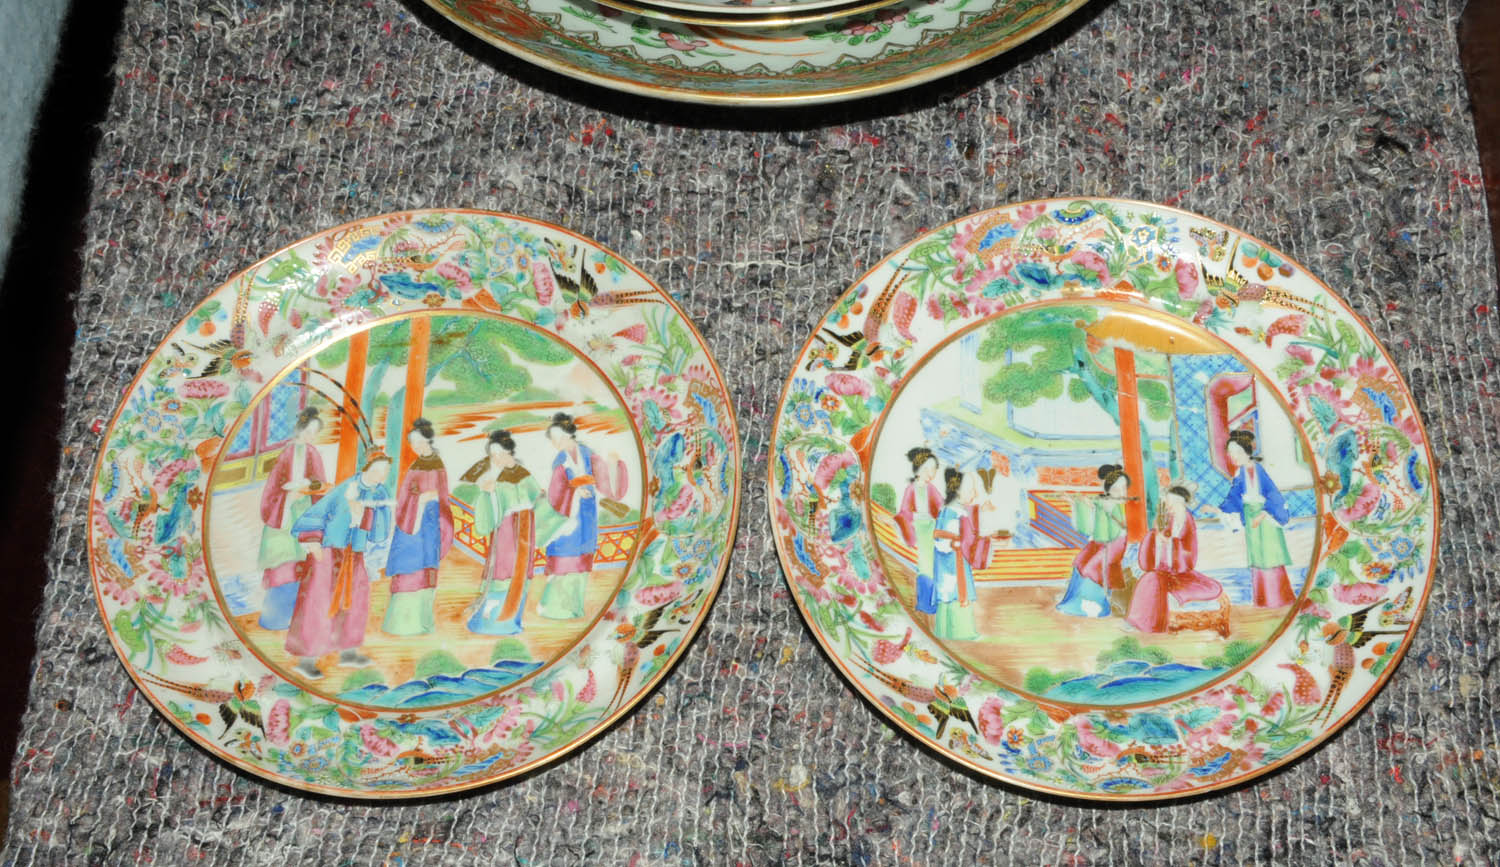 A collection of Chinese Canton enamel wares, 19th century, - Image 9 of 16